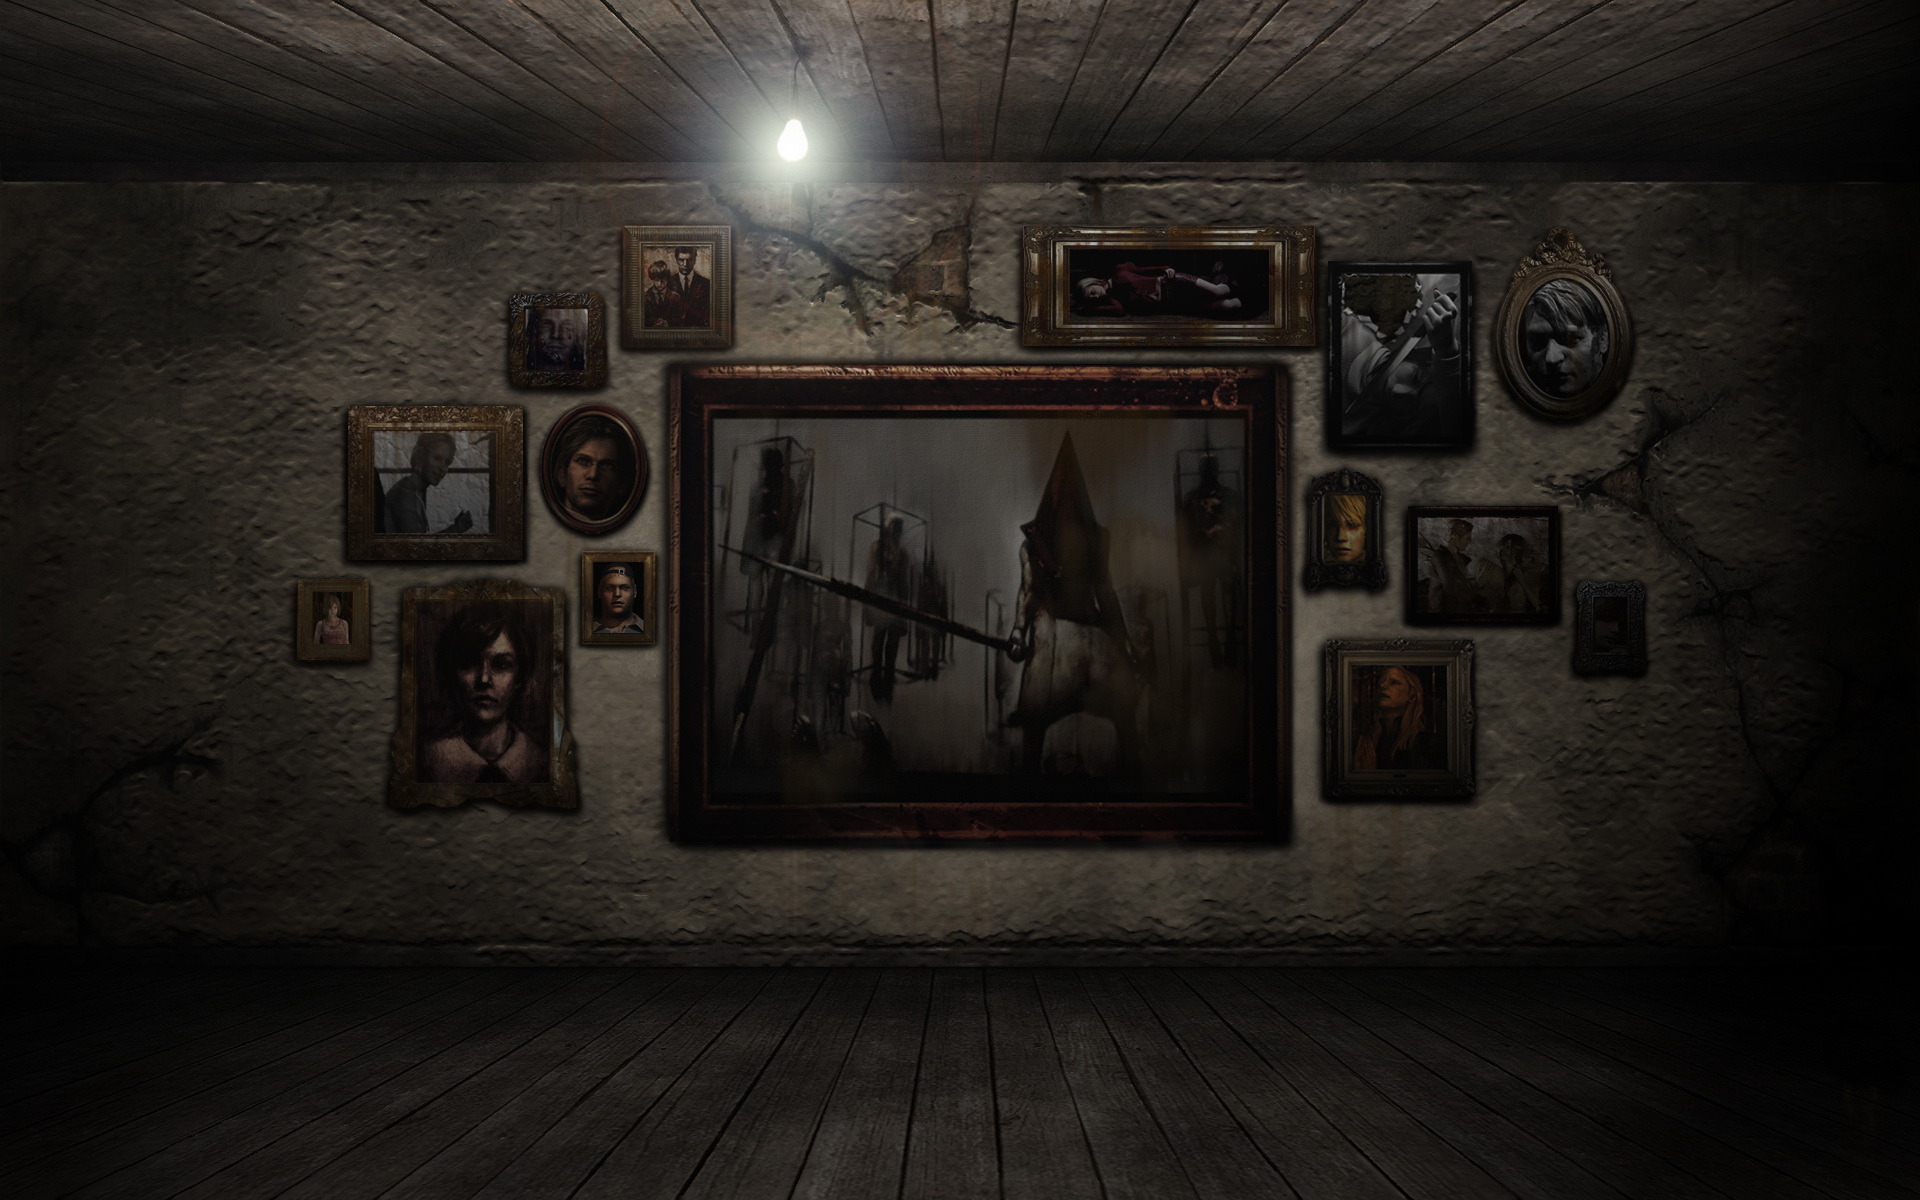 silent hill wallpaper,darkness,wall,room,still life photography,photography